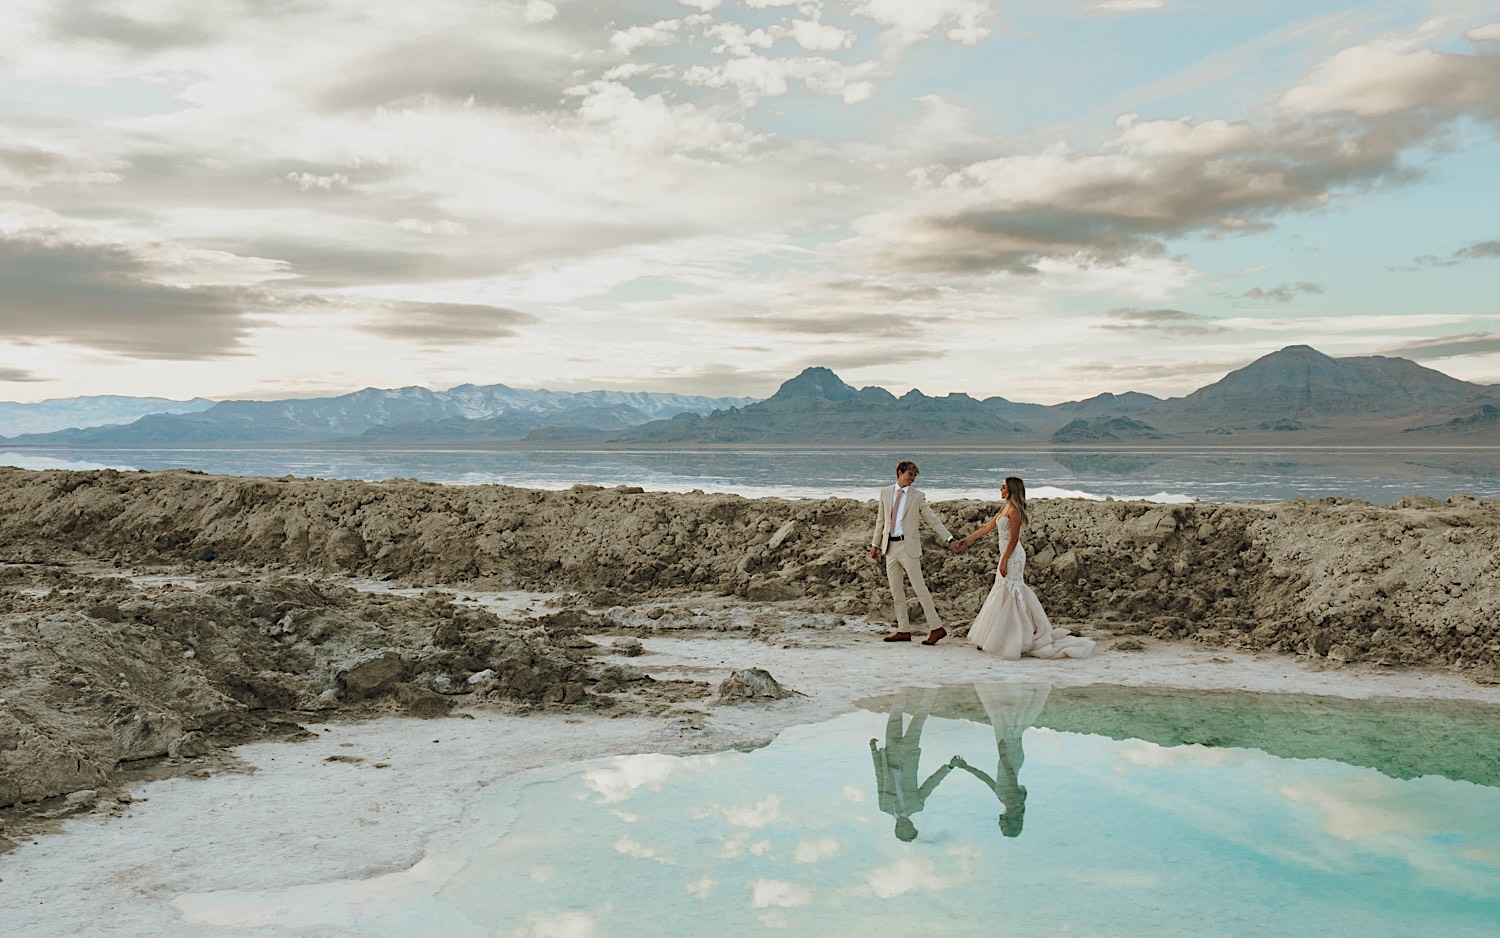 During their elopement in the Utah Salt Flats, a groom leads the bride by her hand and smiles back at her as they walk next to a pool of water with mountains in the background